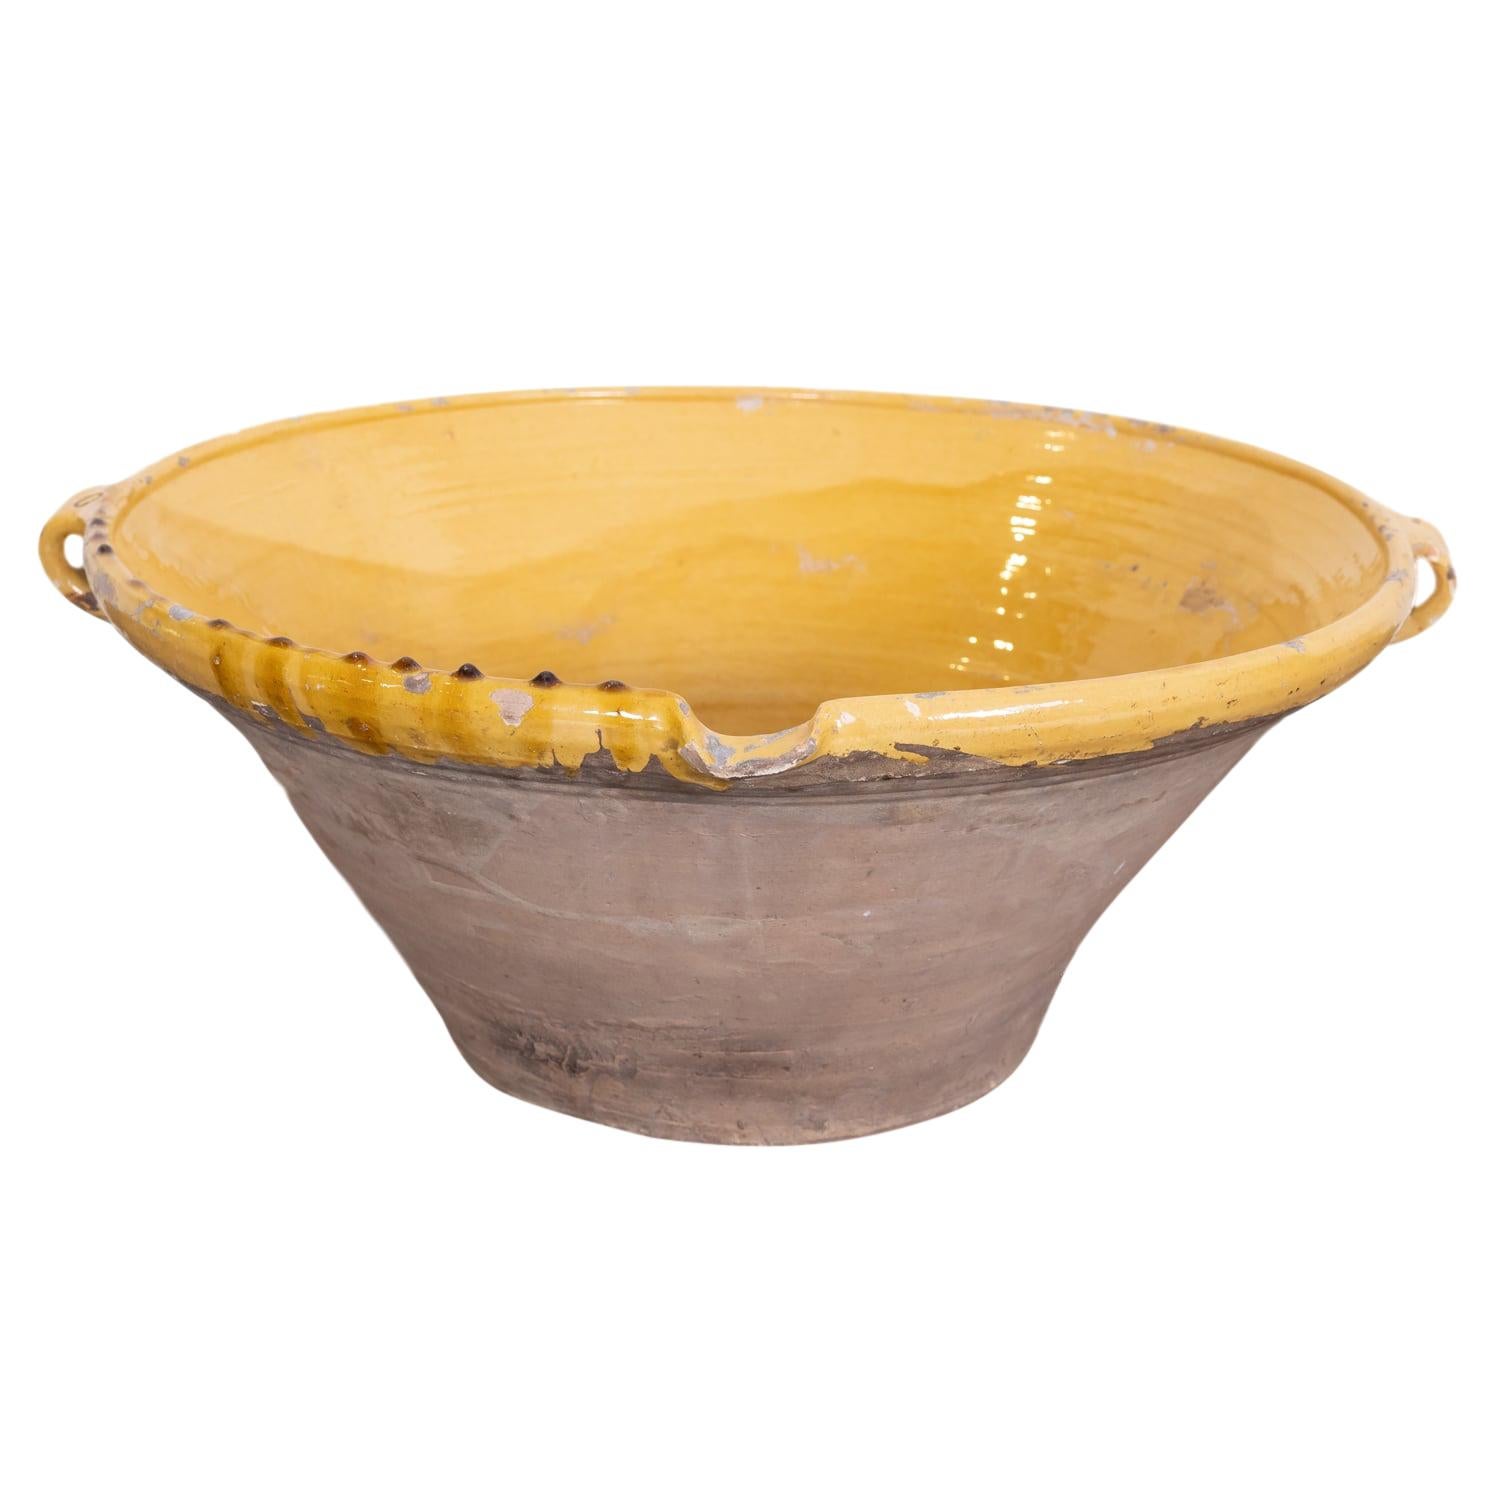 Large 19th Century French Terracotta Tian Bowl with Bright Yellow Glaze